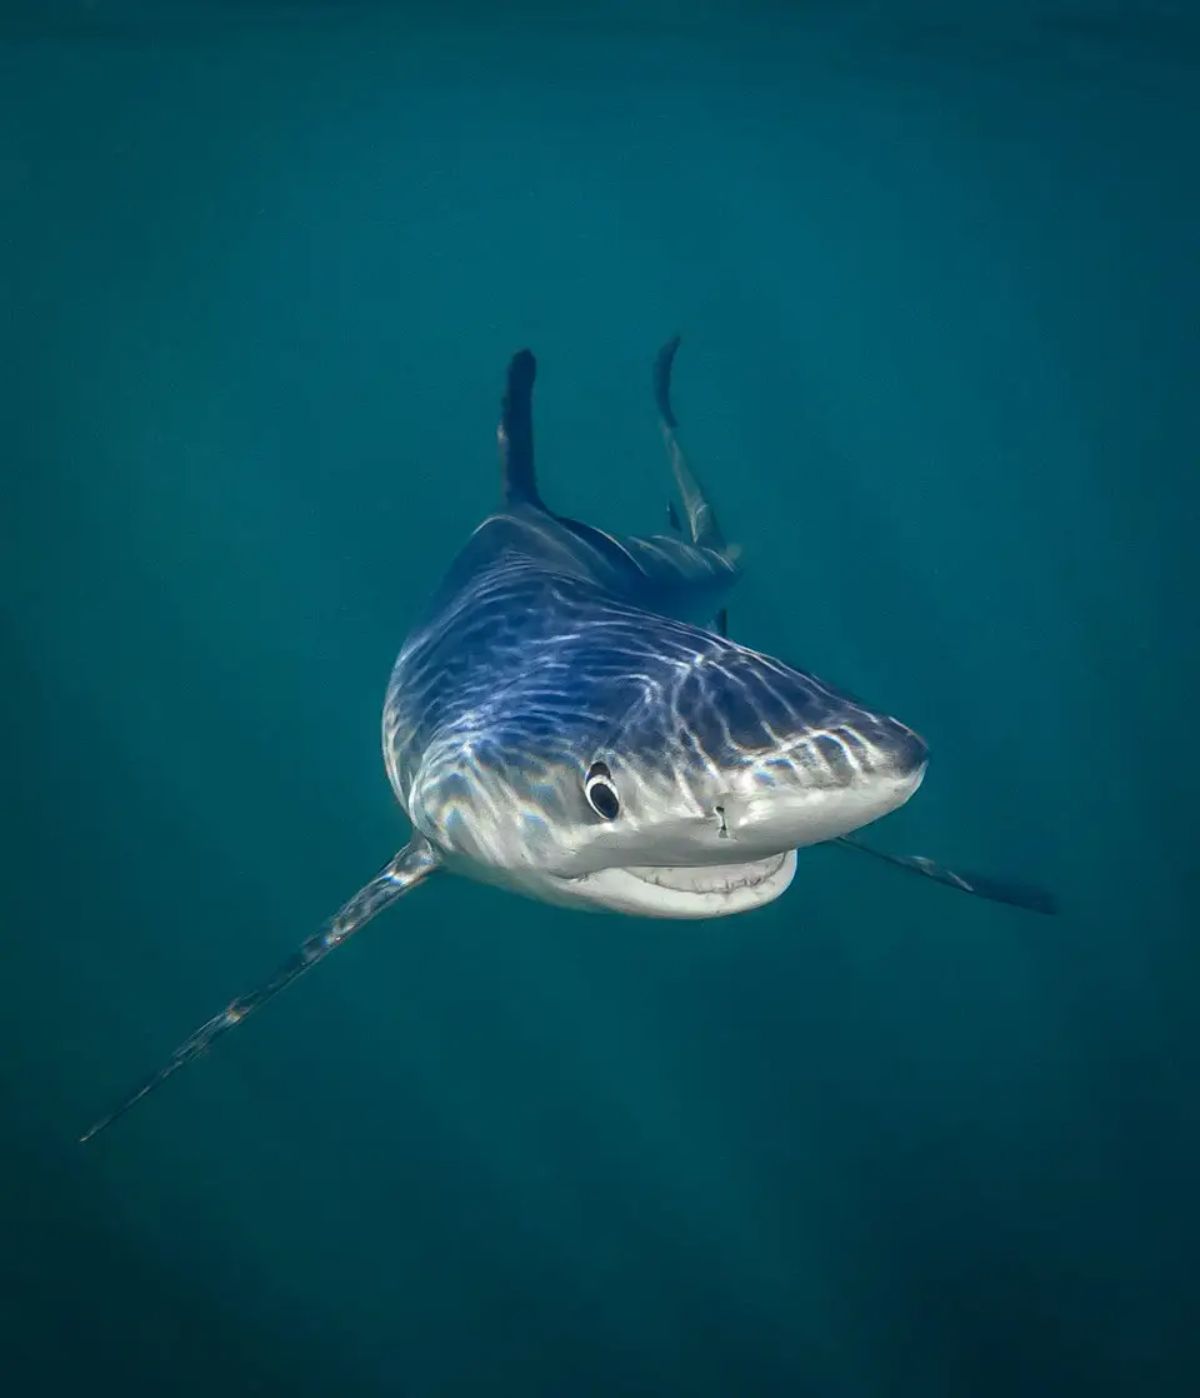 blue and grey shark smiling under water